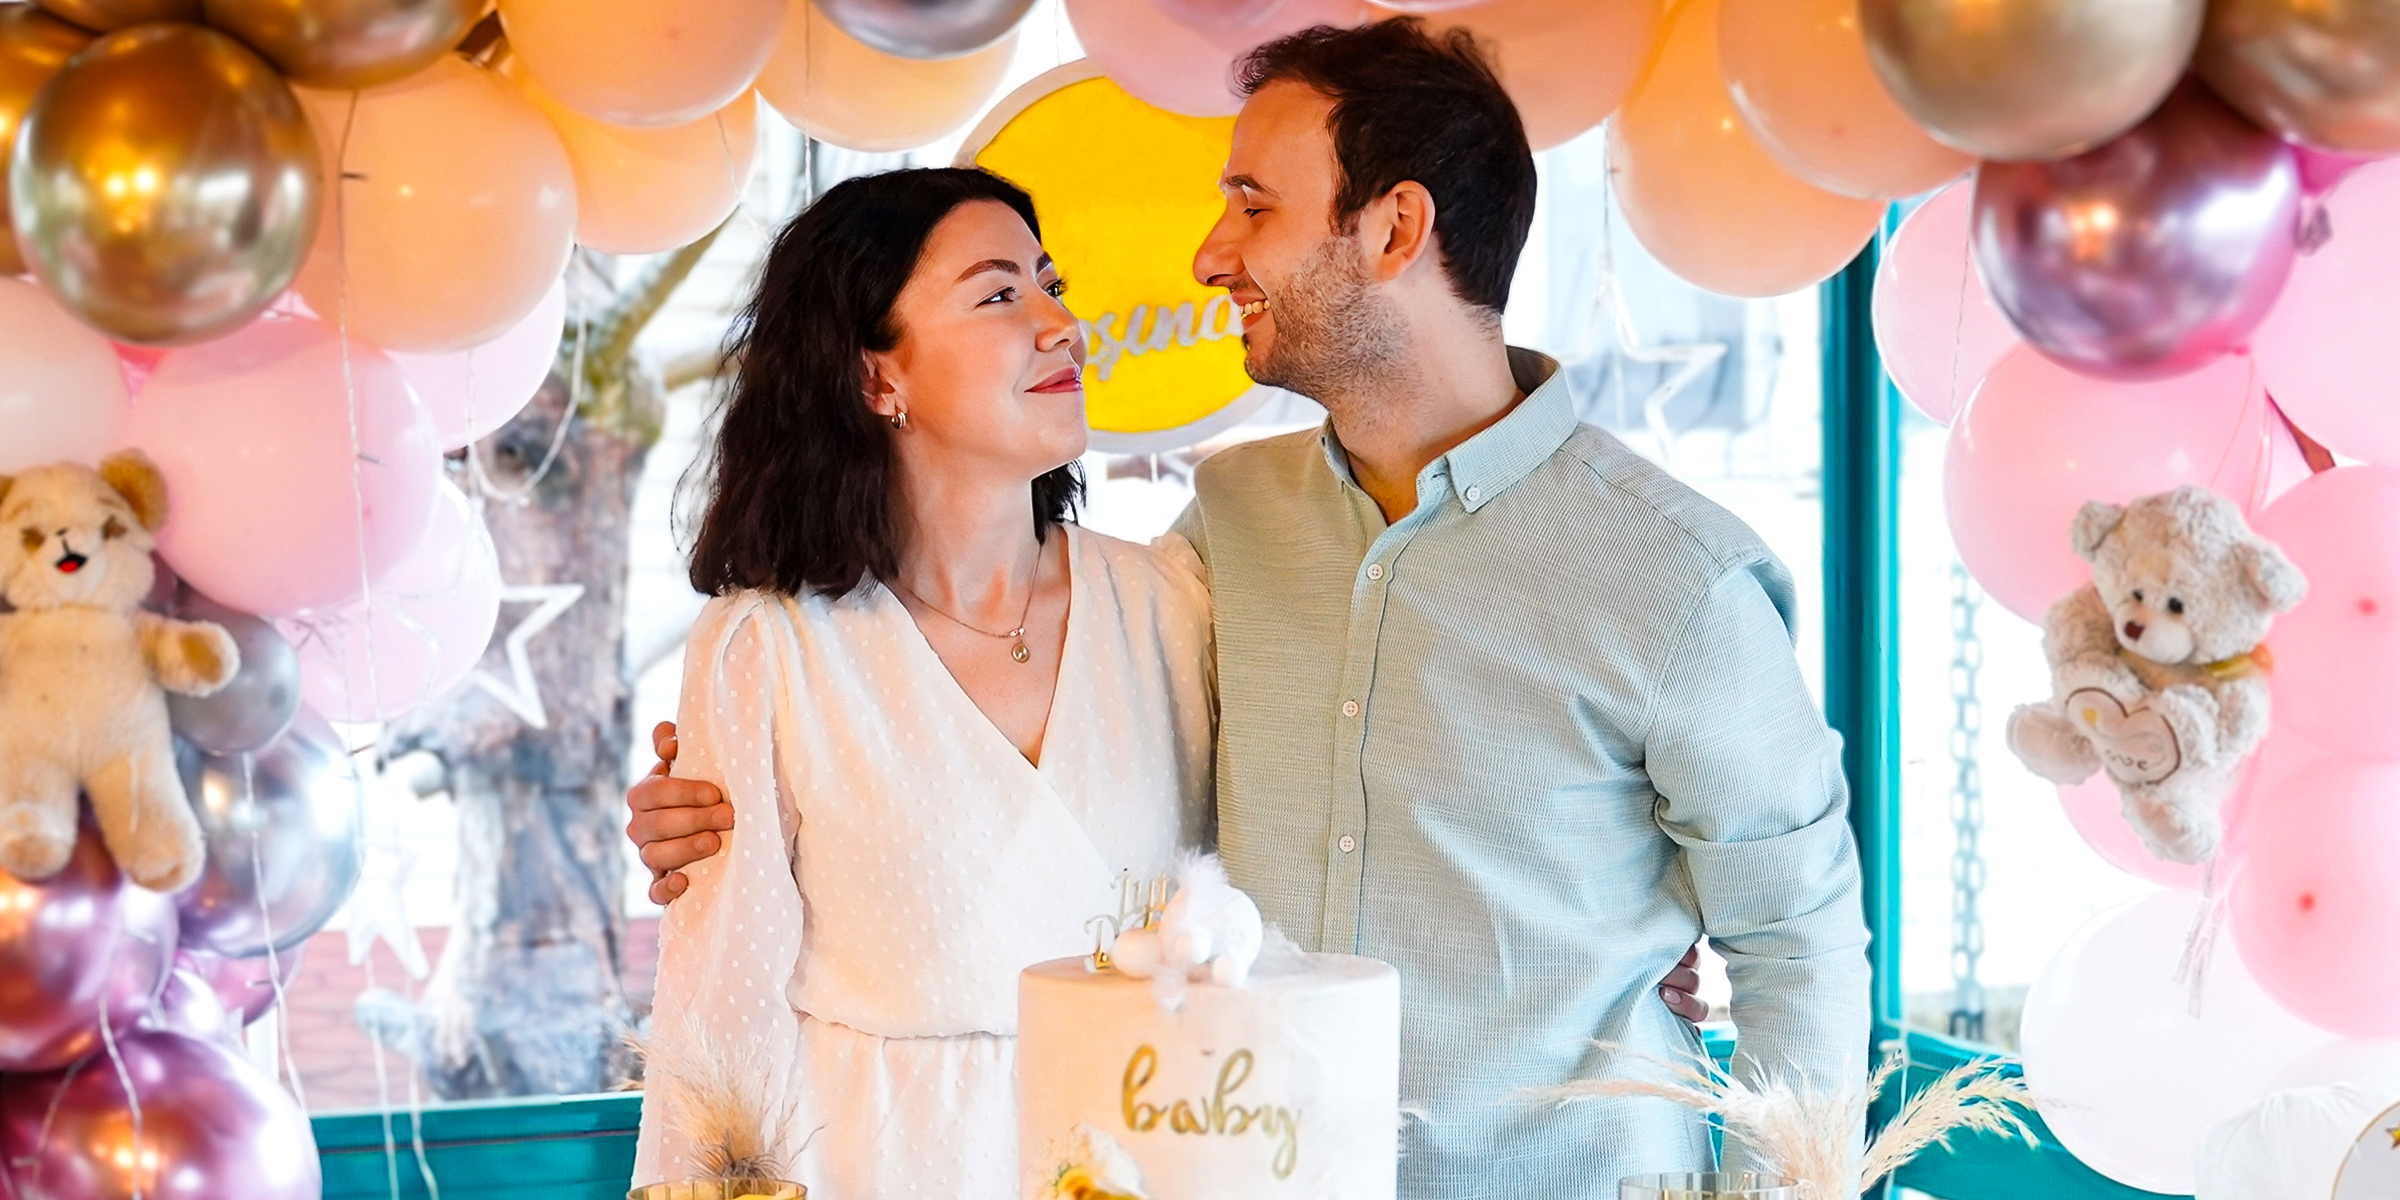 A pregnant couple at their baby shower | Source: Shutterstock